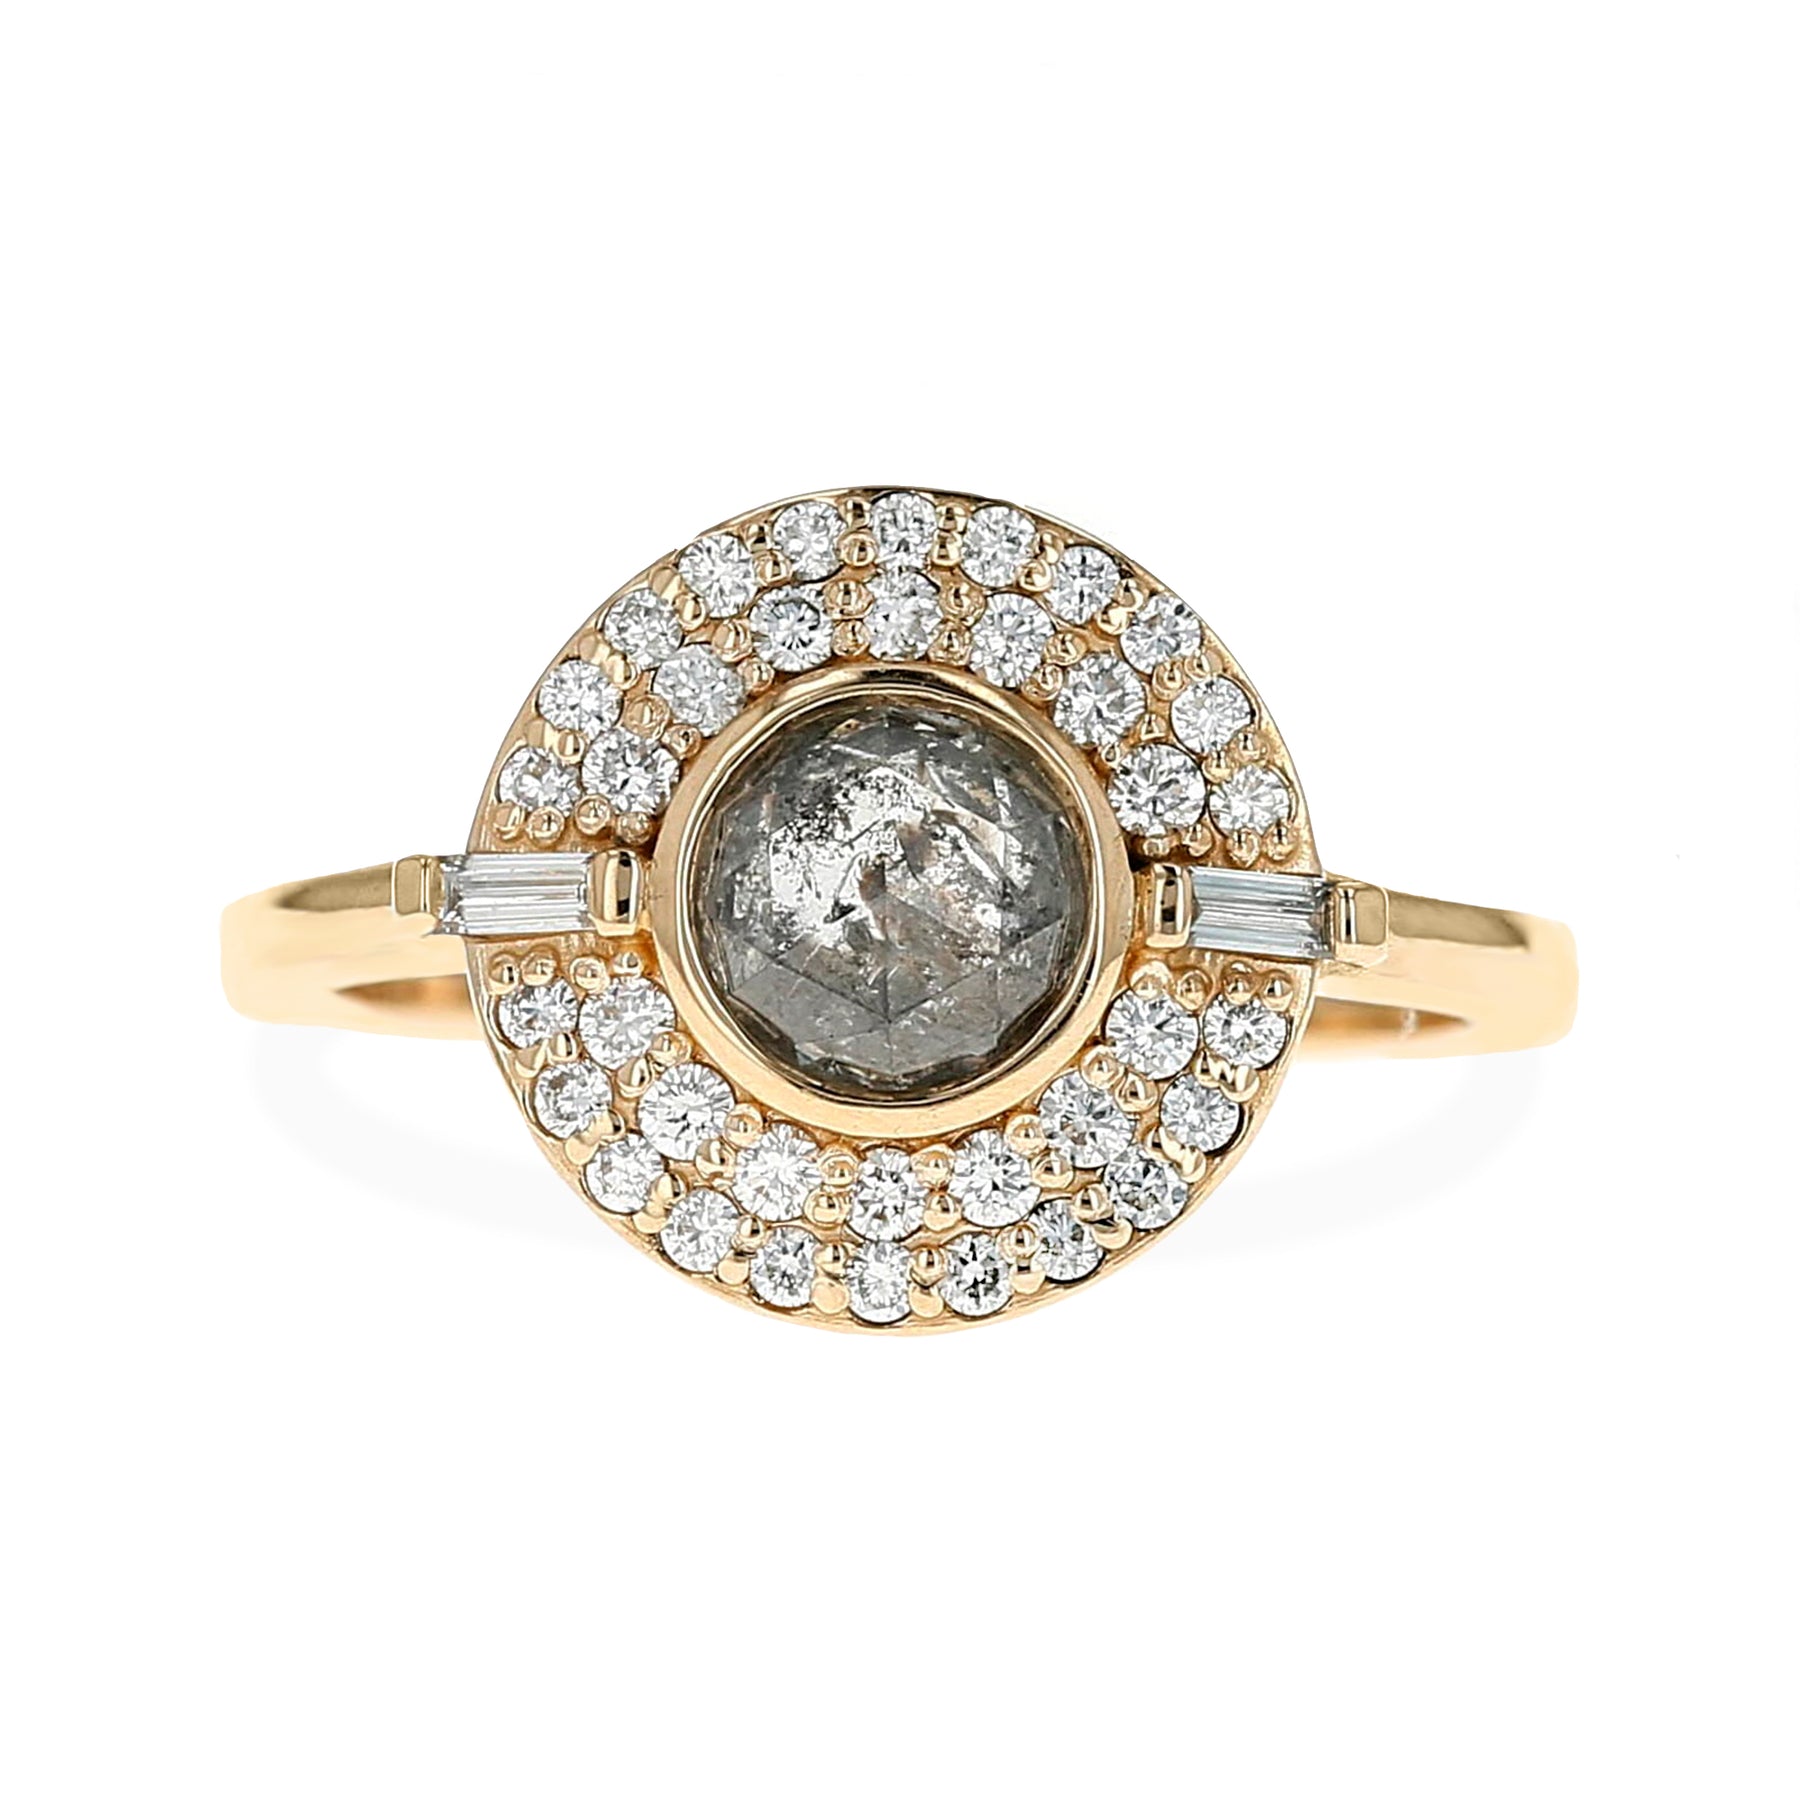 0.74ct round rose cut gray diamond bezel set with double round diamond halo and baguette accent stones alternative engagement ring statement ring 14k yellow gold